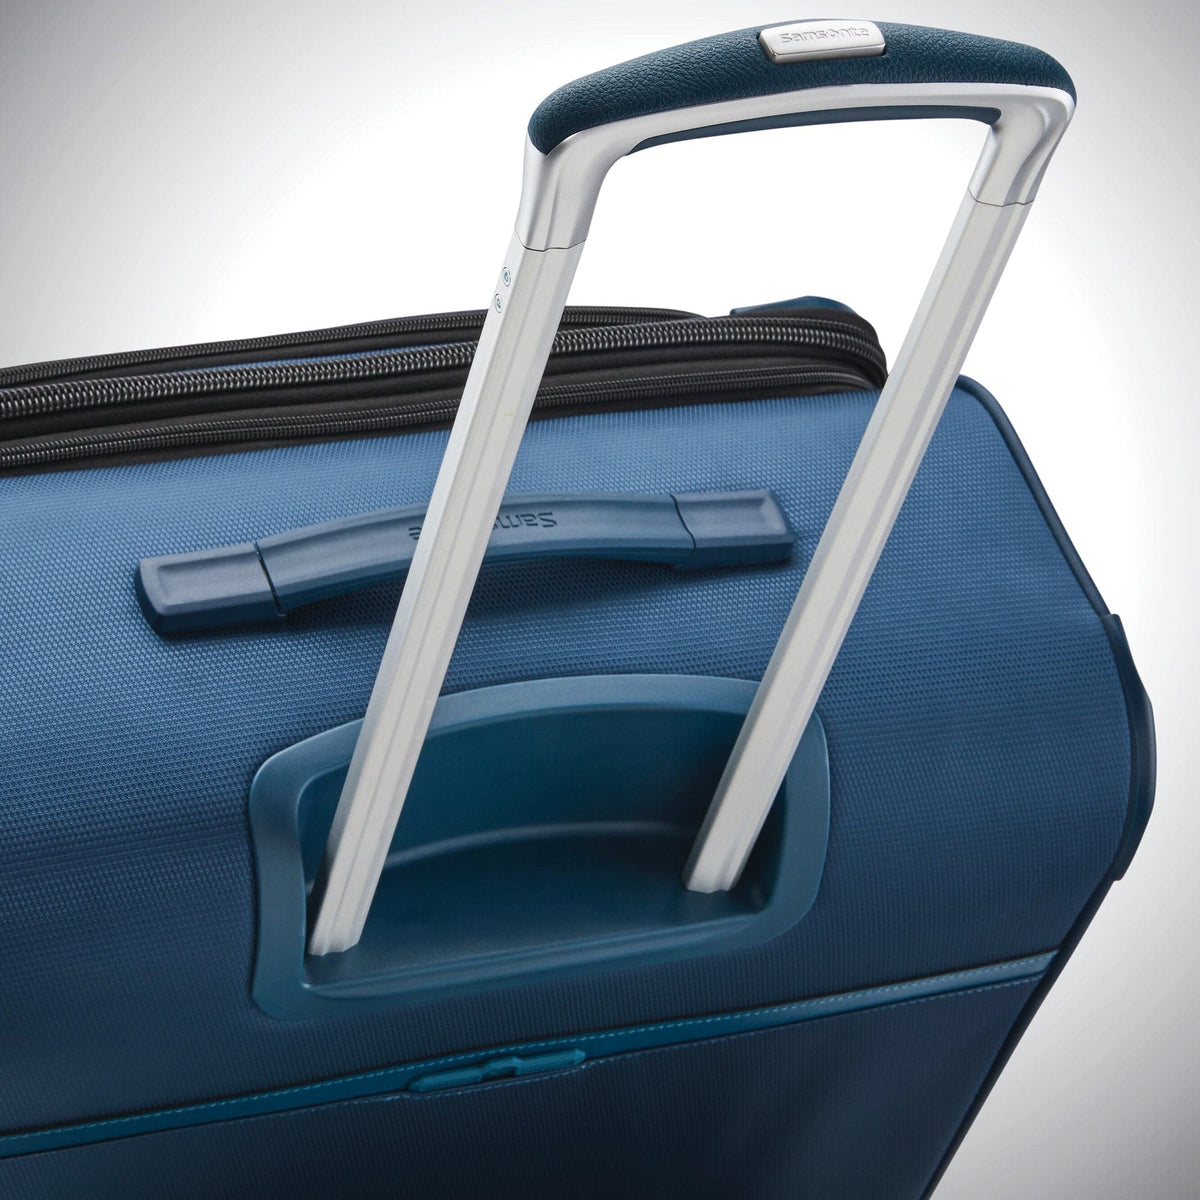 Samsonite SoLyte DLX Carry On Expandable Spinner Luggage